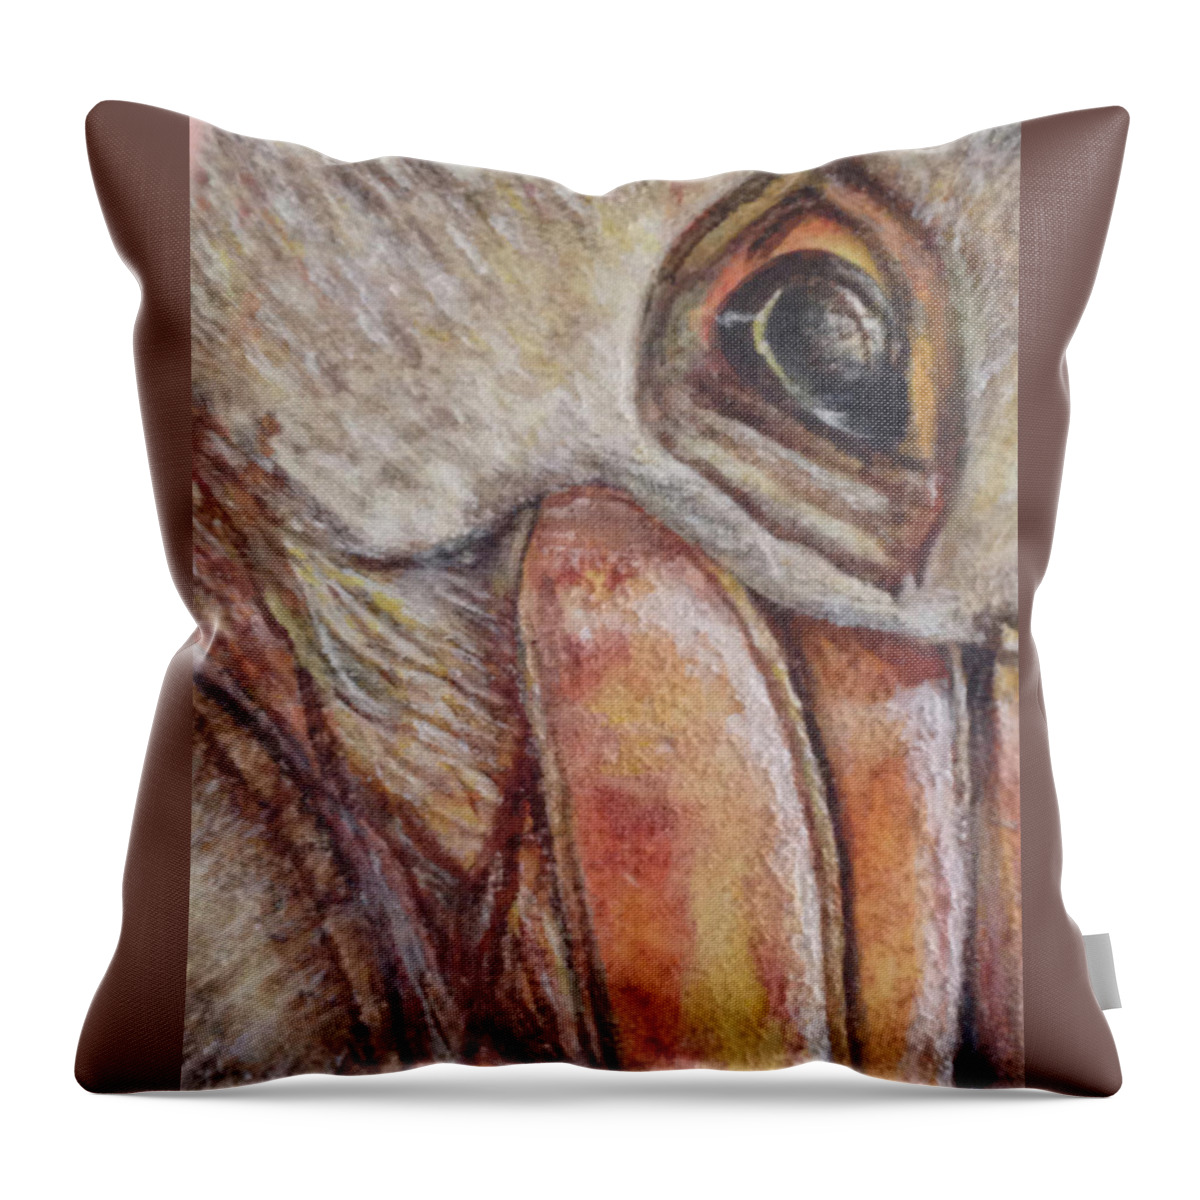 Endangered Species Throw Pillow featuring the painting Pelican by Toni Willey